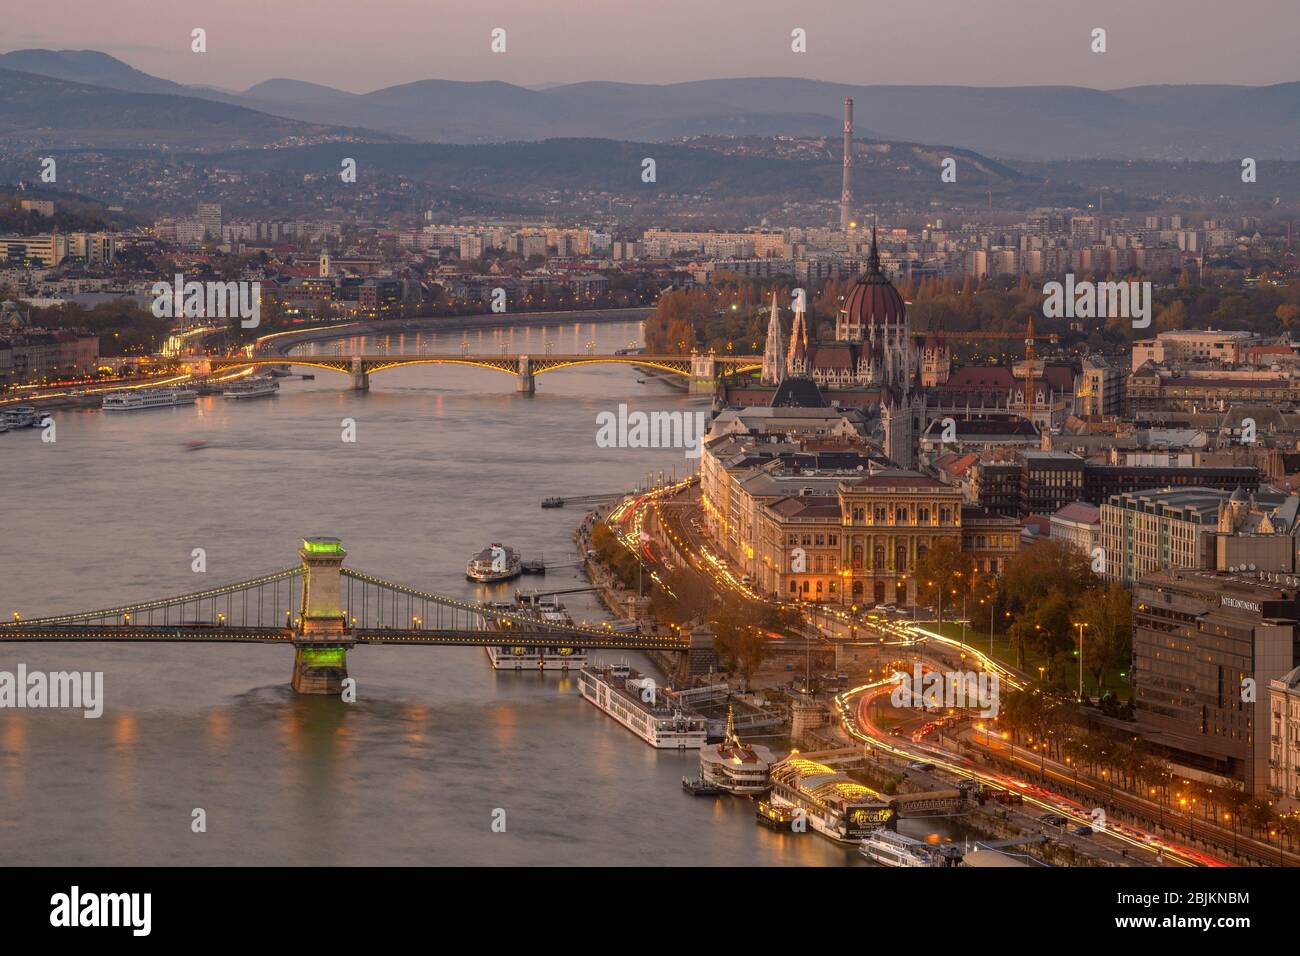 Views of Budapest from the Citadella- Danube and it's bridges at dusk, Budapest, Central Hungary, Hungary. Stock Photo